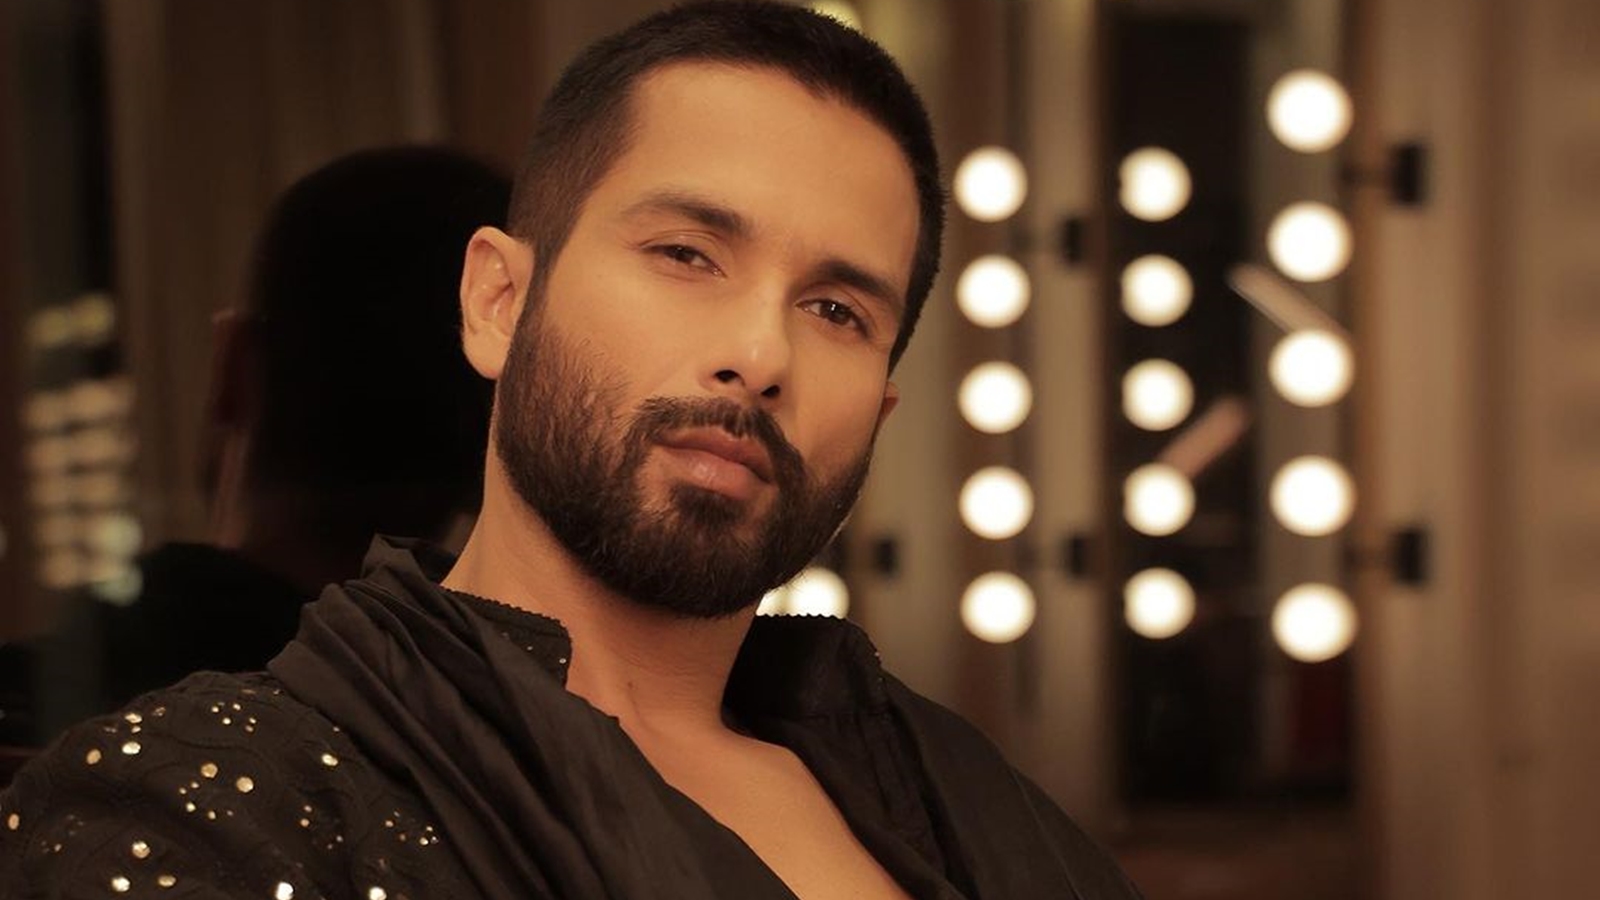 Shahid Kapoor Opens Up About Following Radha Soami Faith ‘i Was Very Lost Couldn T Make Sense